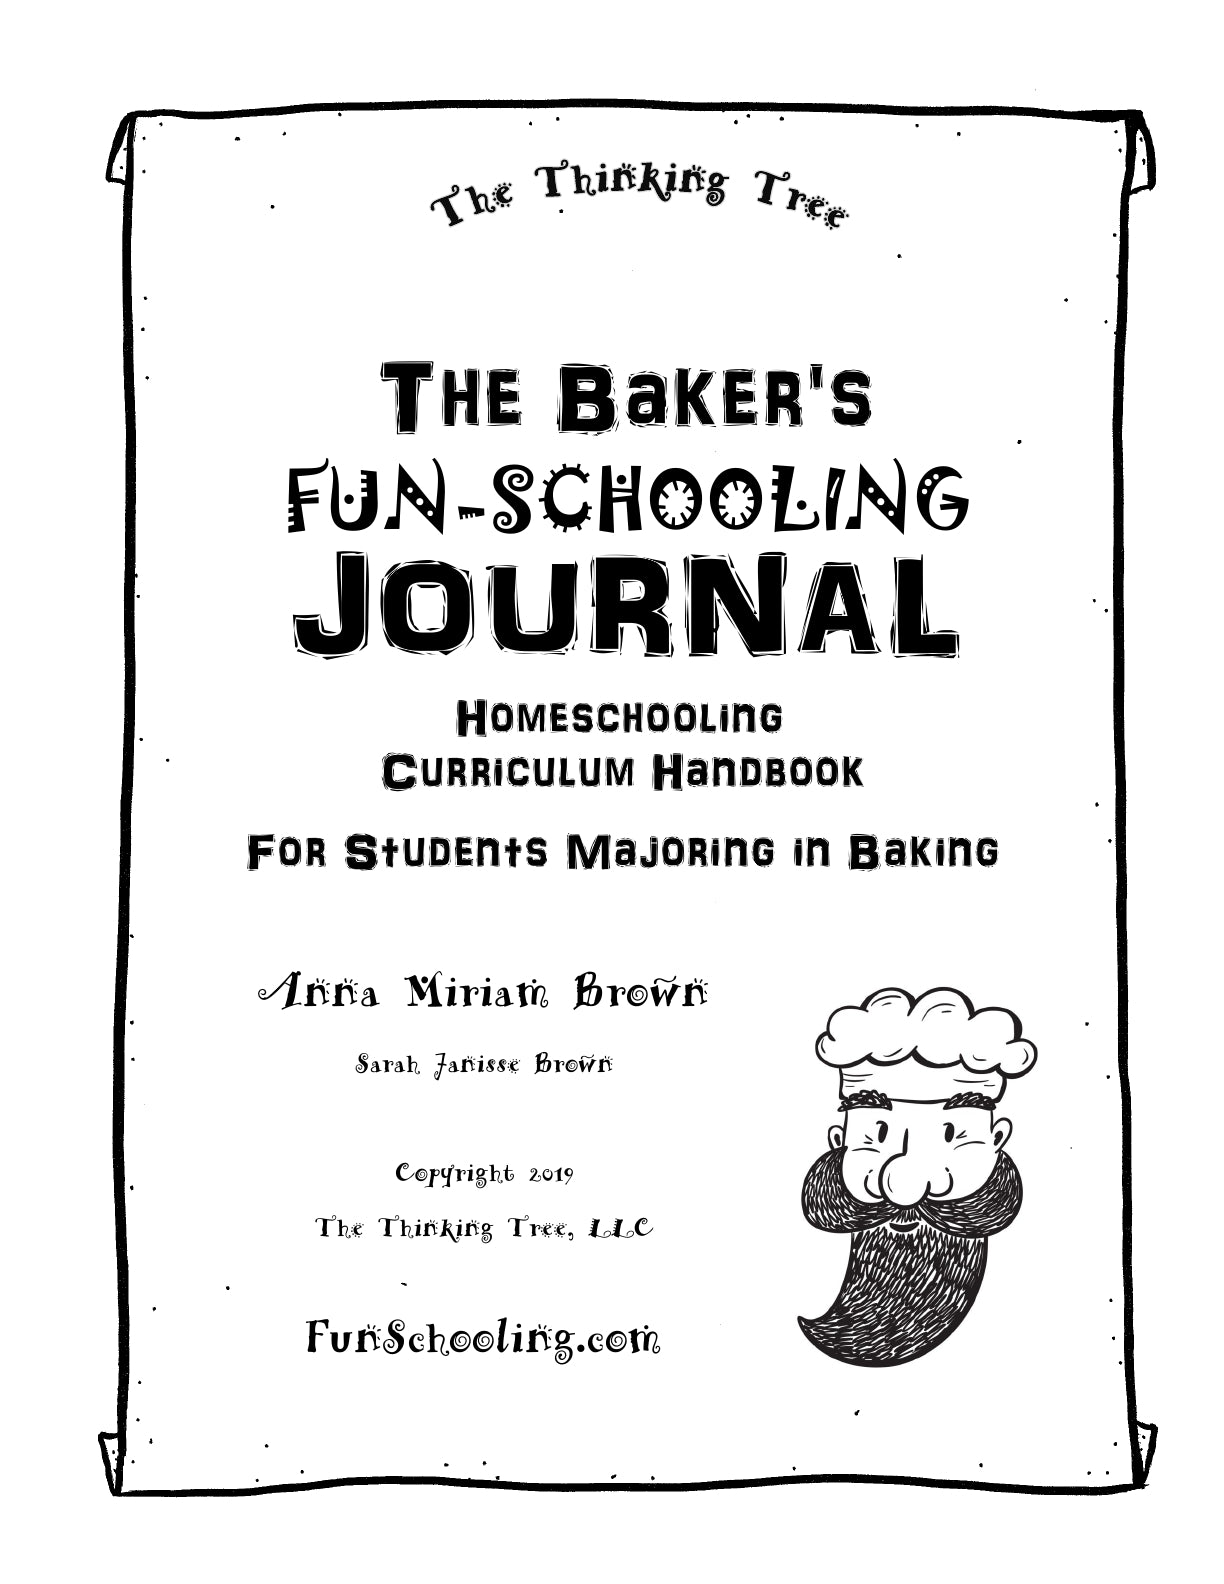 (Age 11+) The Baker's Fun-Schooling Journal